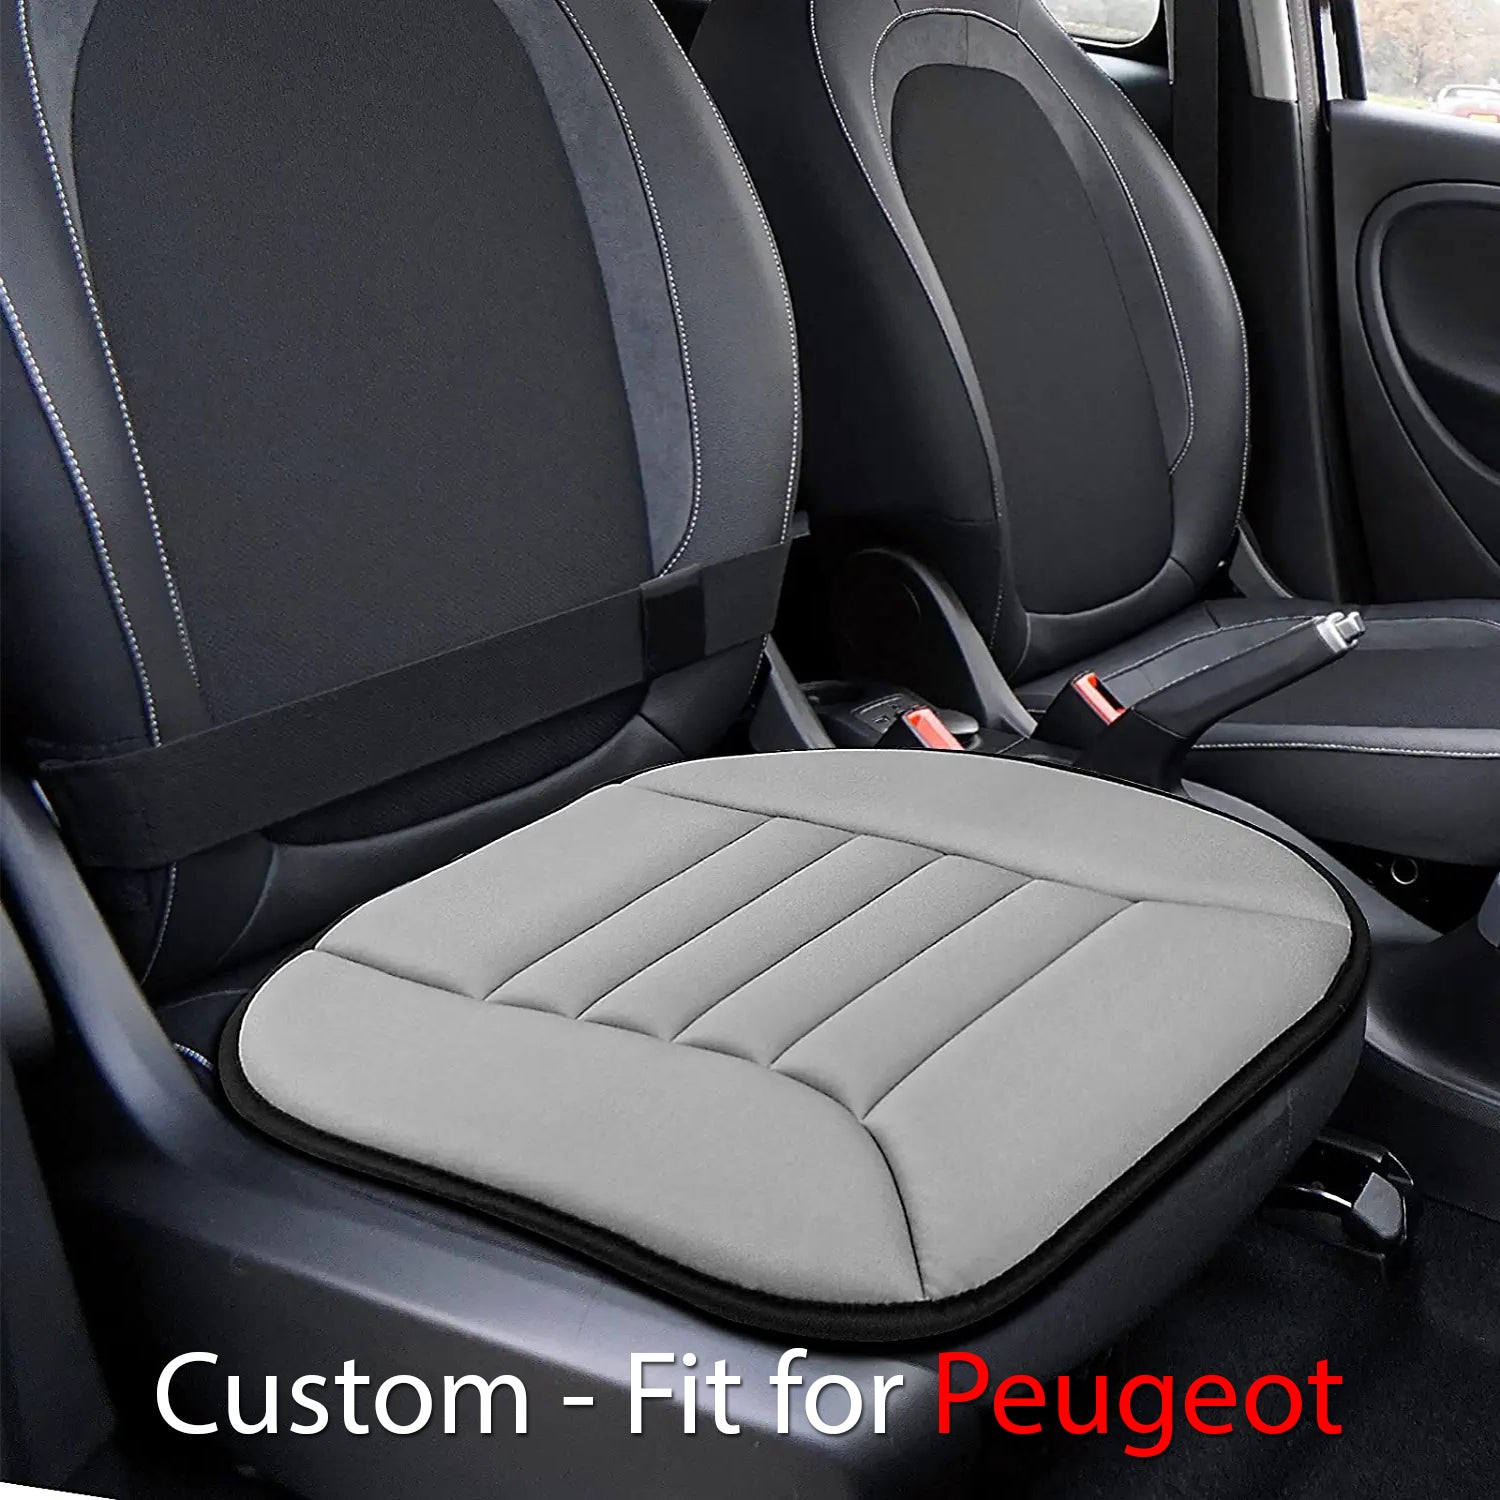 Car Seat Cushion with 1.2inch Comfort Memory Foam, Custom-Fit For Car, Seat Cushion for Car and Office Chair DLPE247